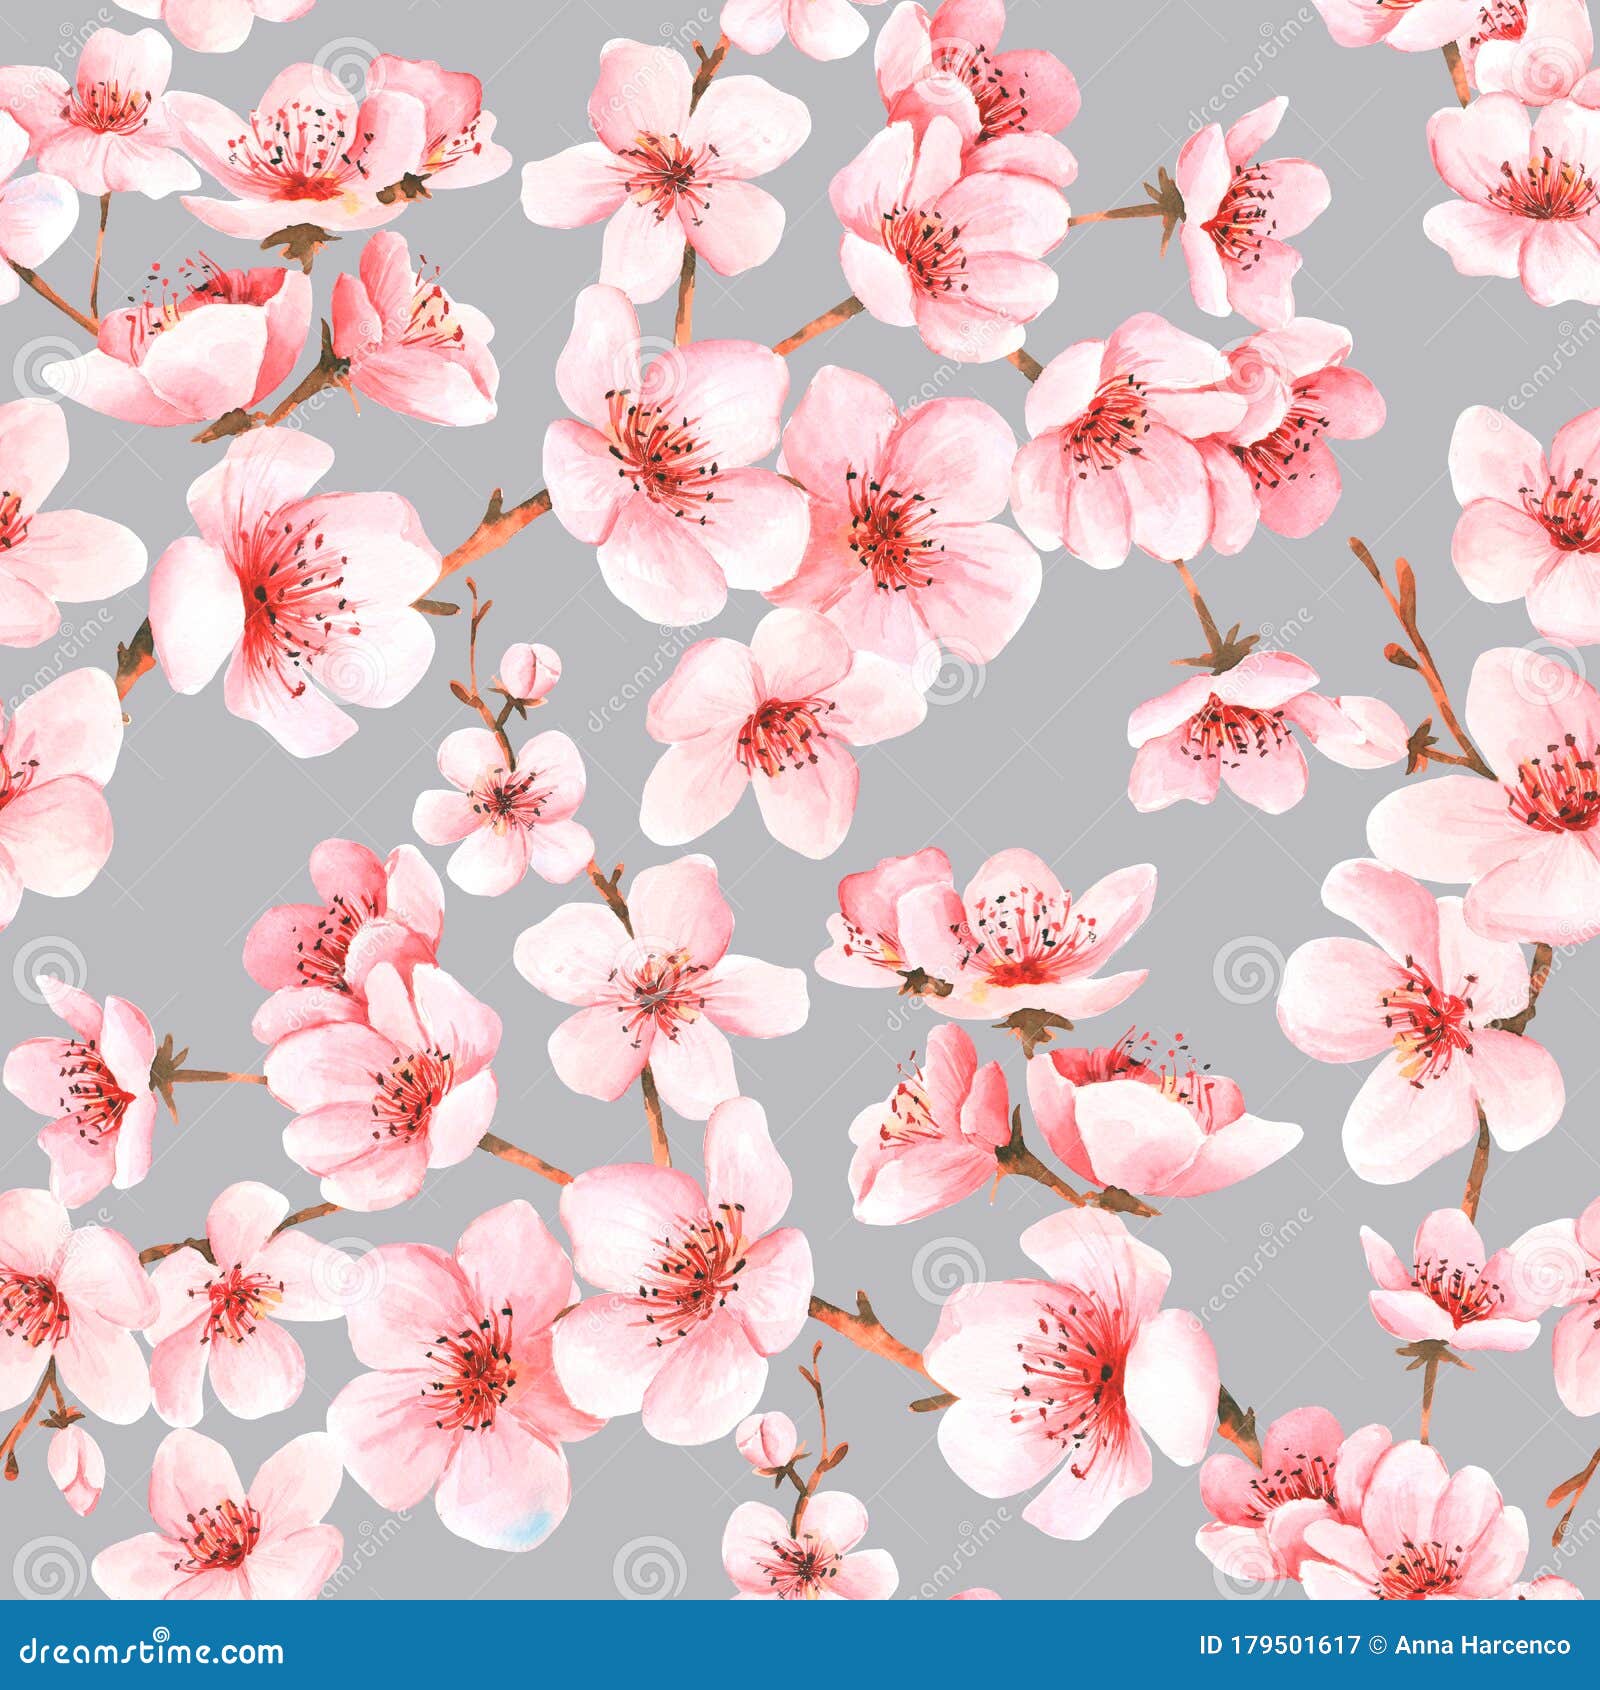 Seamless Pattern with Japanese Sakura with Pink Flowers. Cherry-blossom  Background. Stock Vector - Illustration of japan, cherryblossom: 179501617